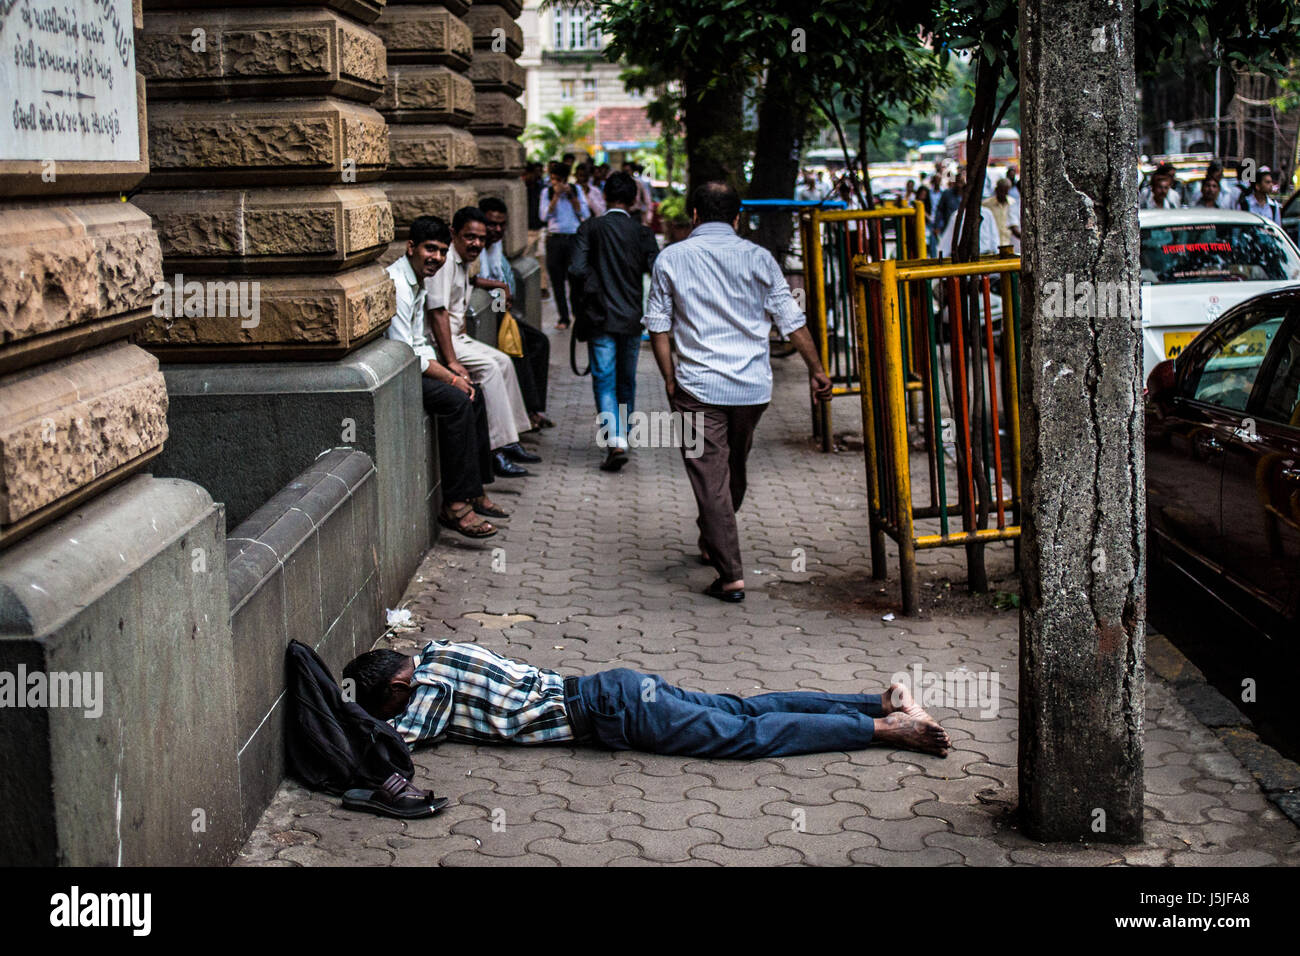 An Indian man taking a nap in the middle of the street during the hot hours in Mumbai, India Stock Photo